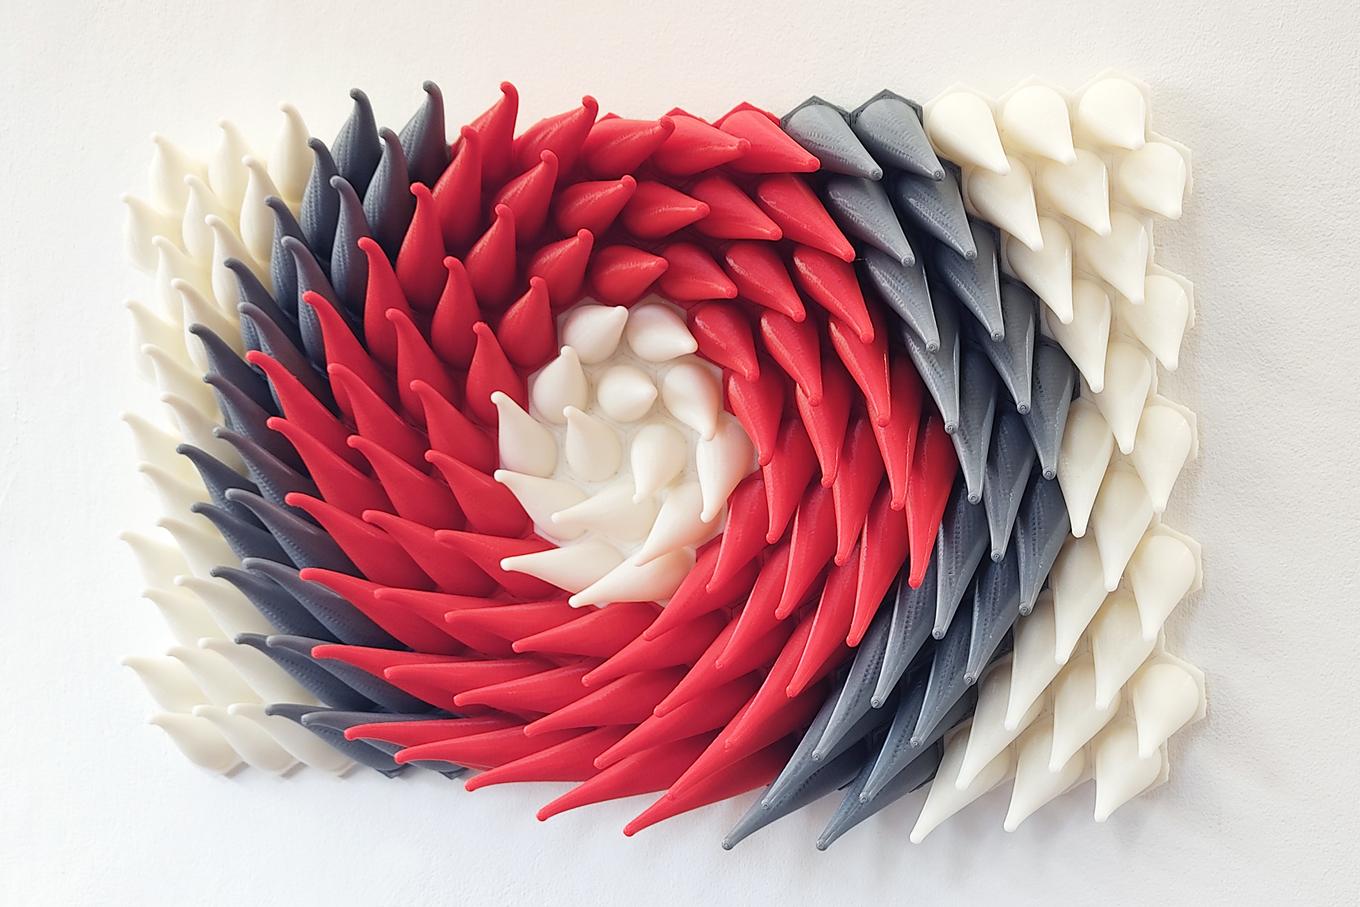 Twisted Tentacles | Herschel Shapiro | Abstract Red Gray 3D Wall Art